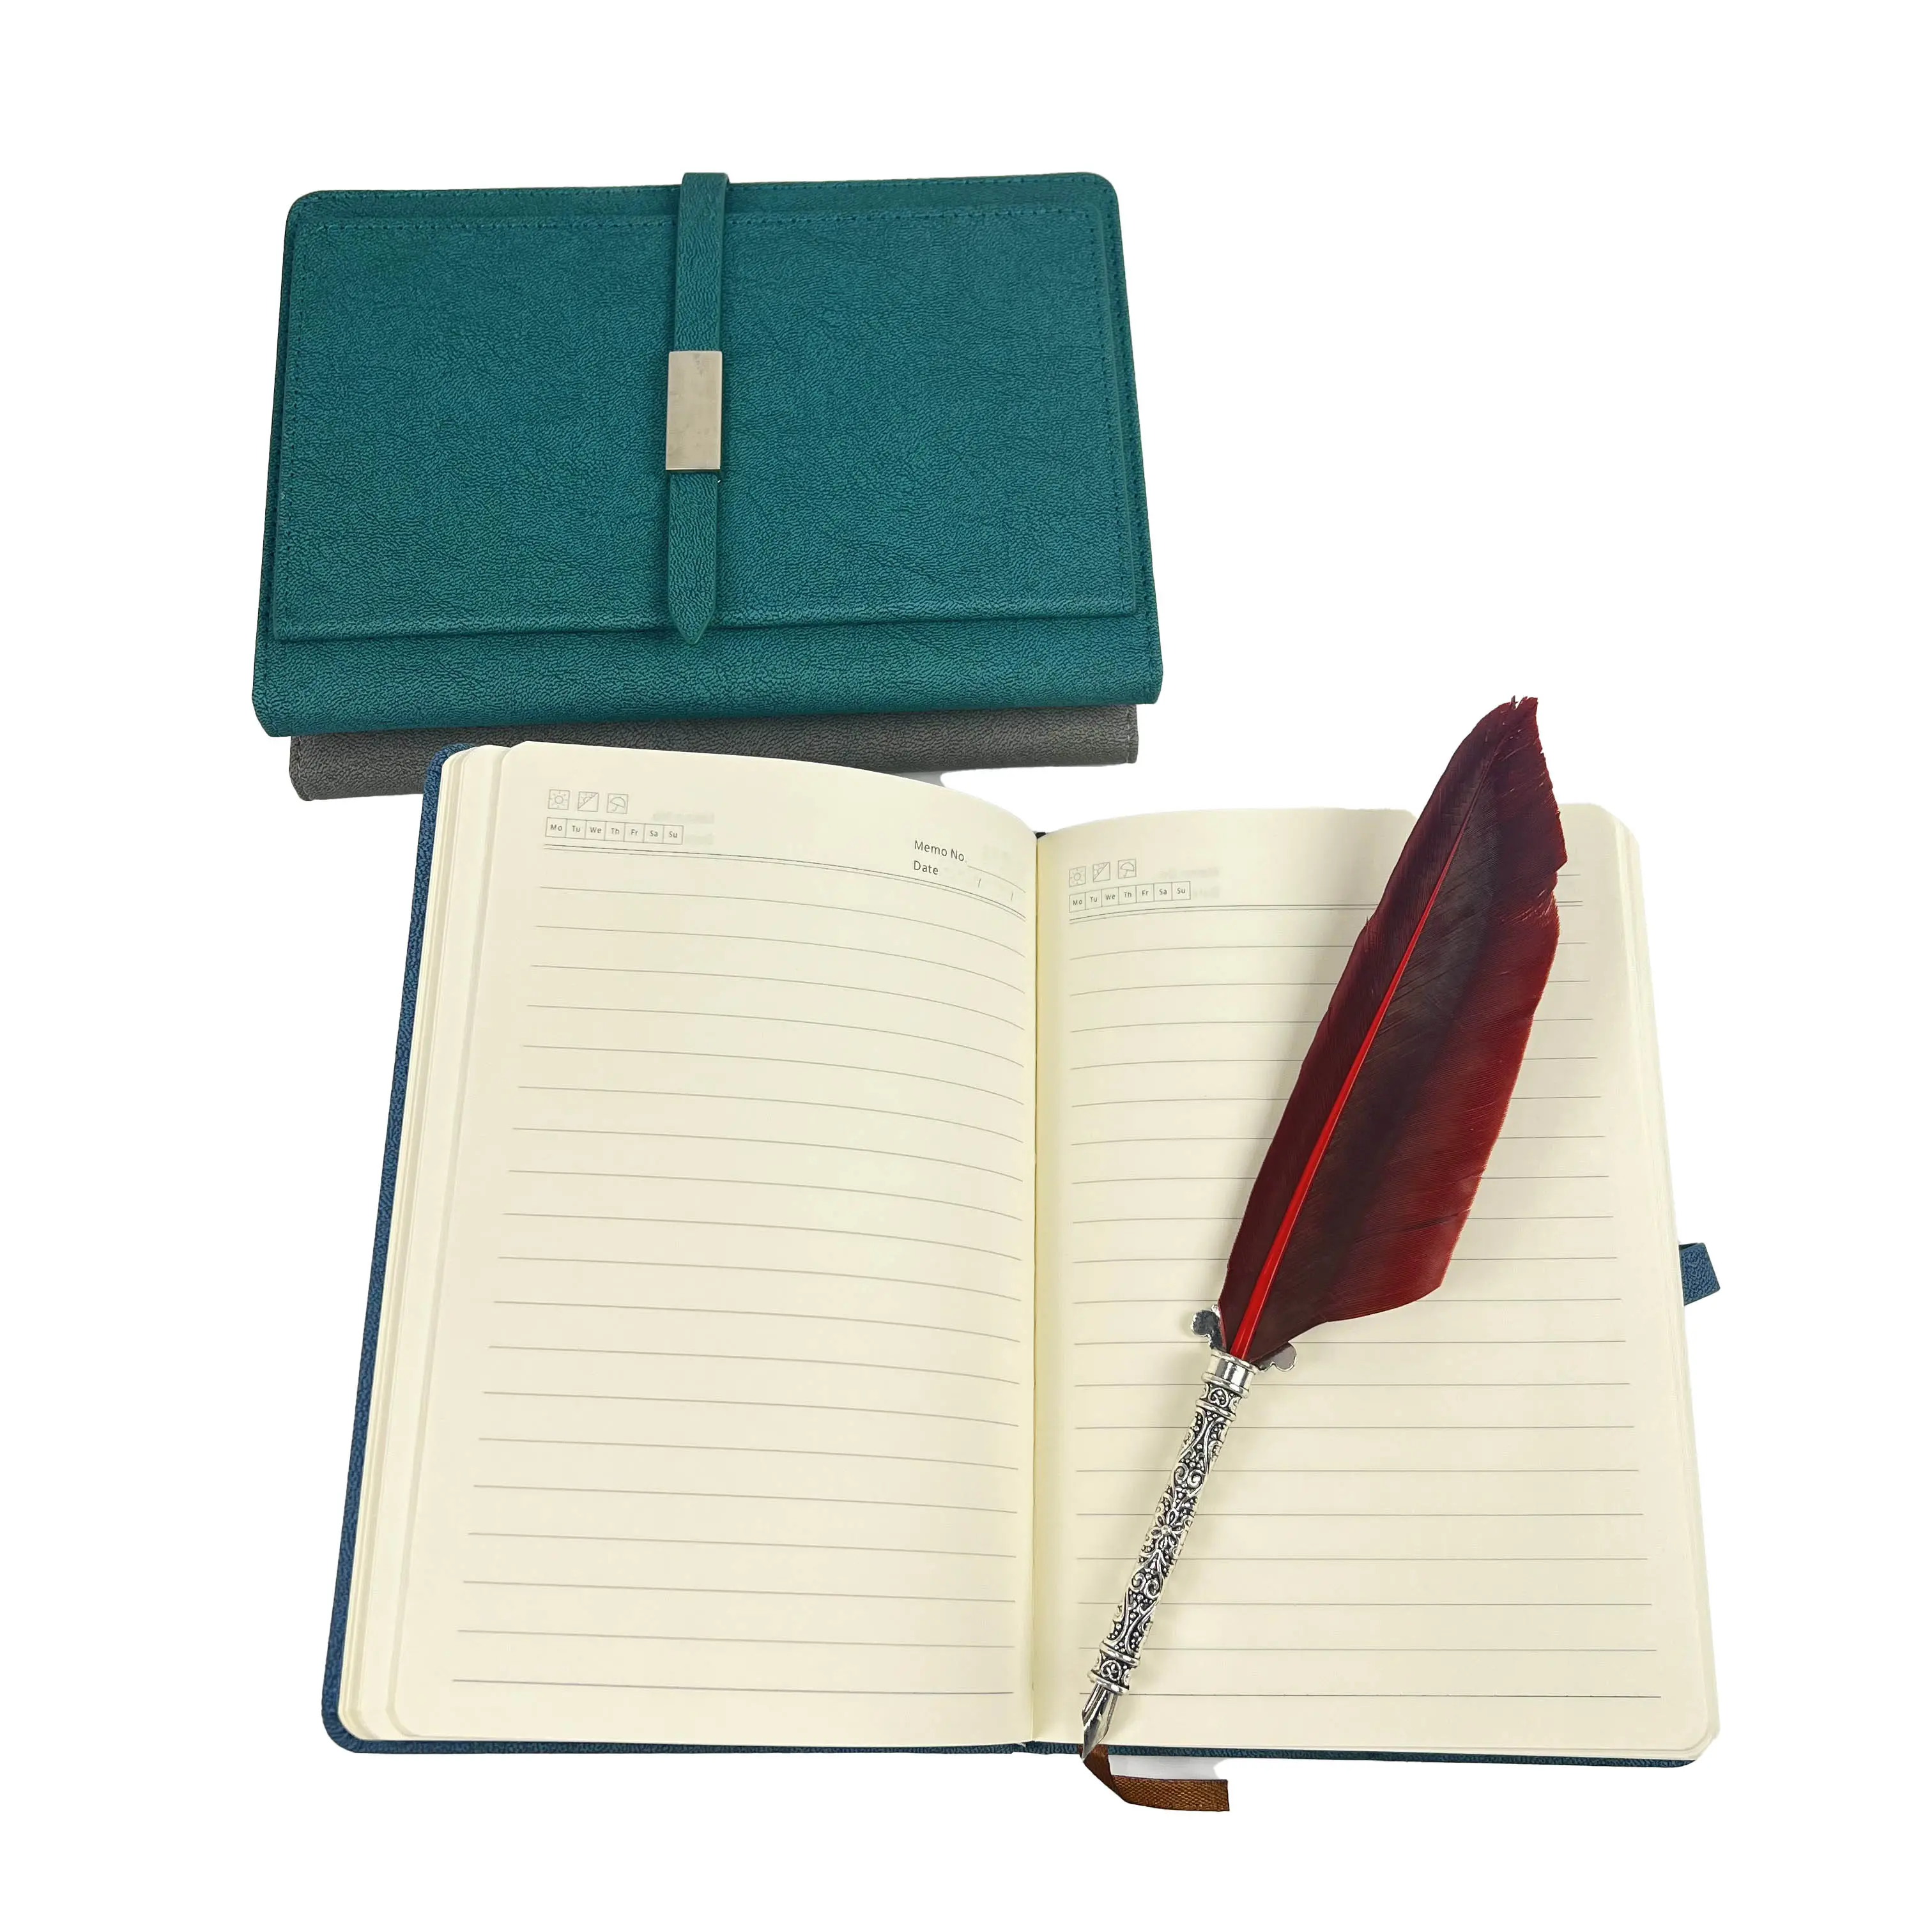 Deluxe A5 Integrated Notebook Leather Journal Planner para la productividad diaria